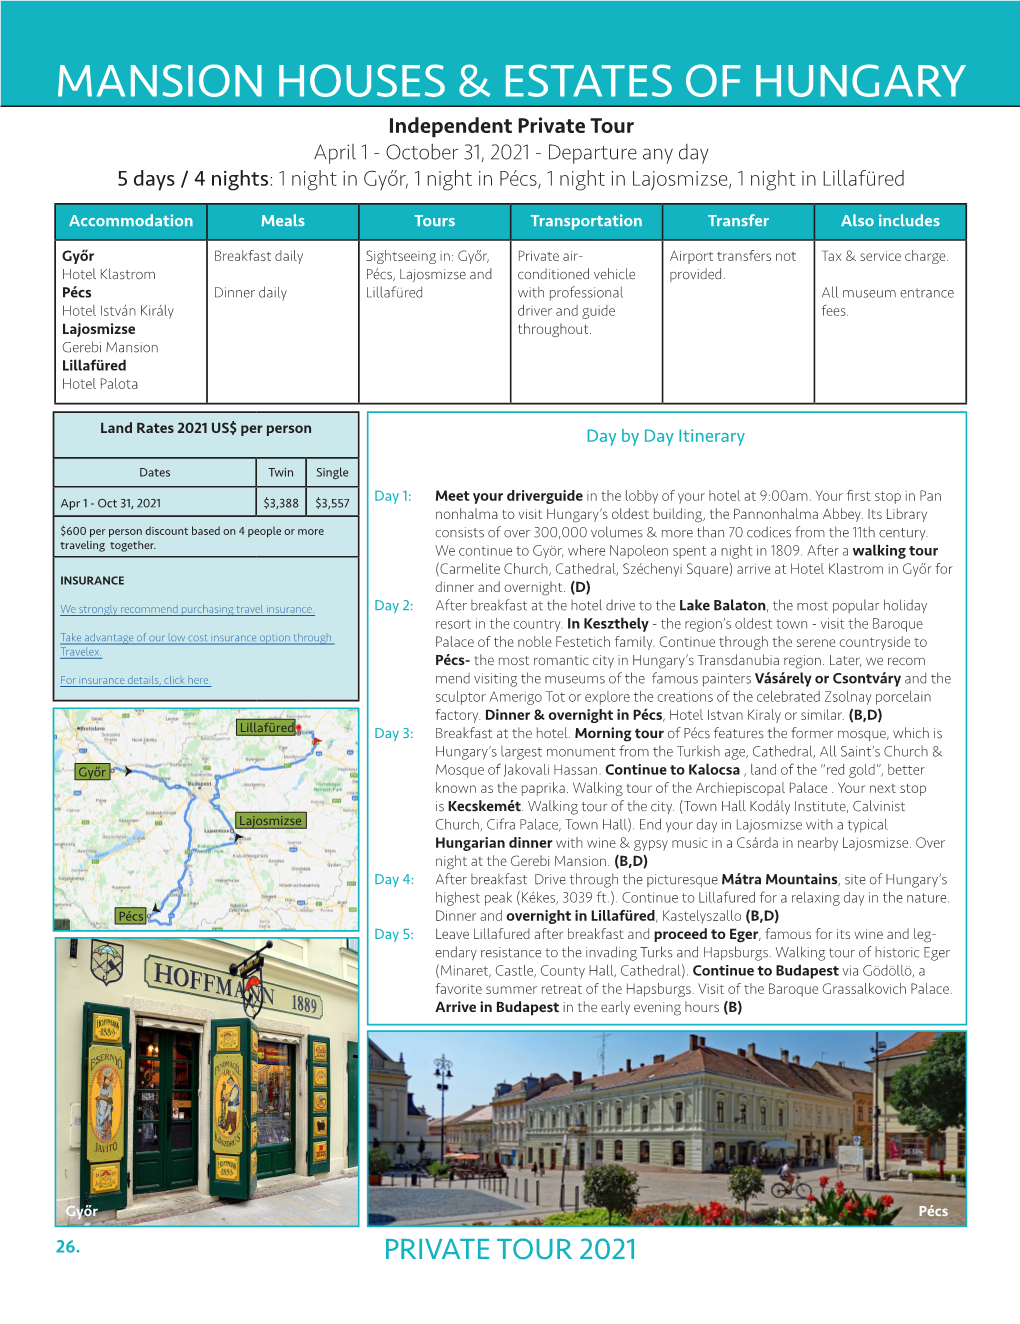 Mansion Houses & Estates of Hungary